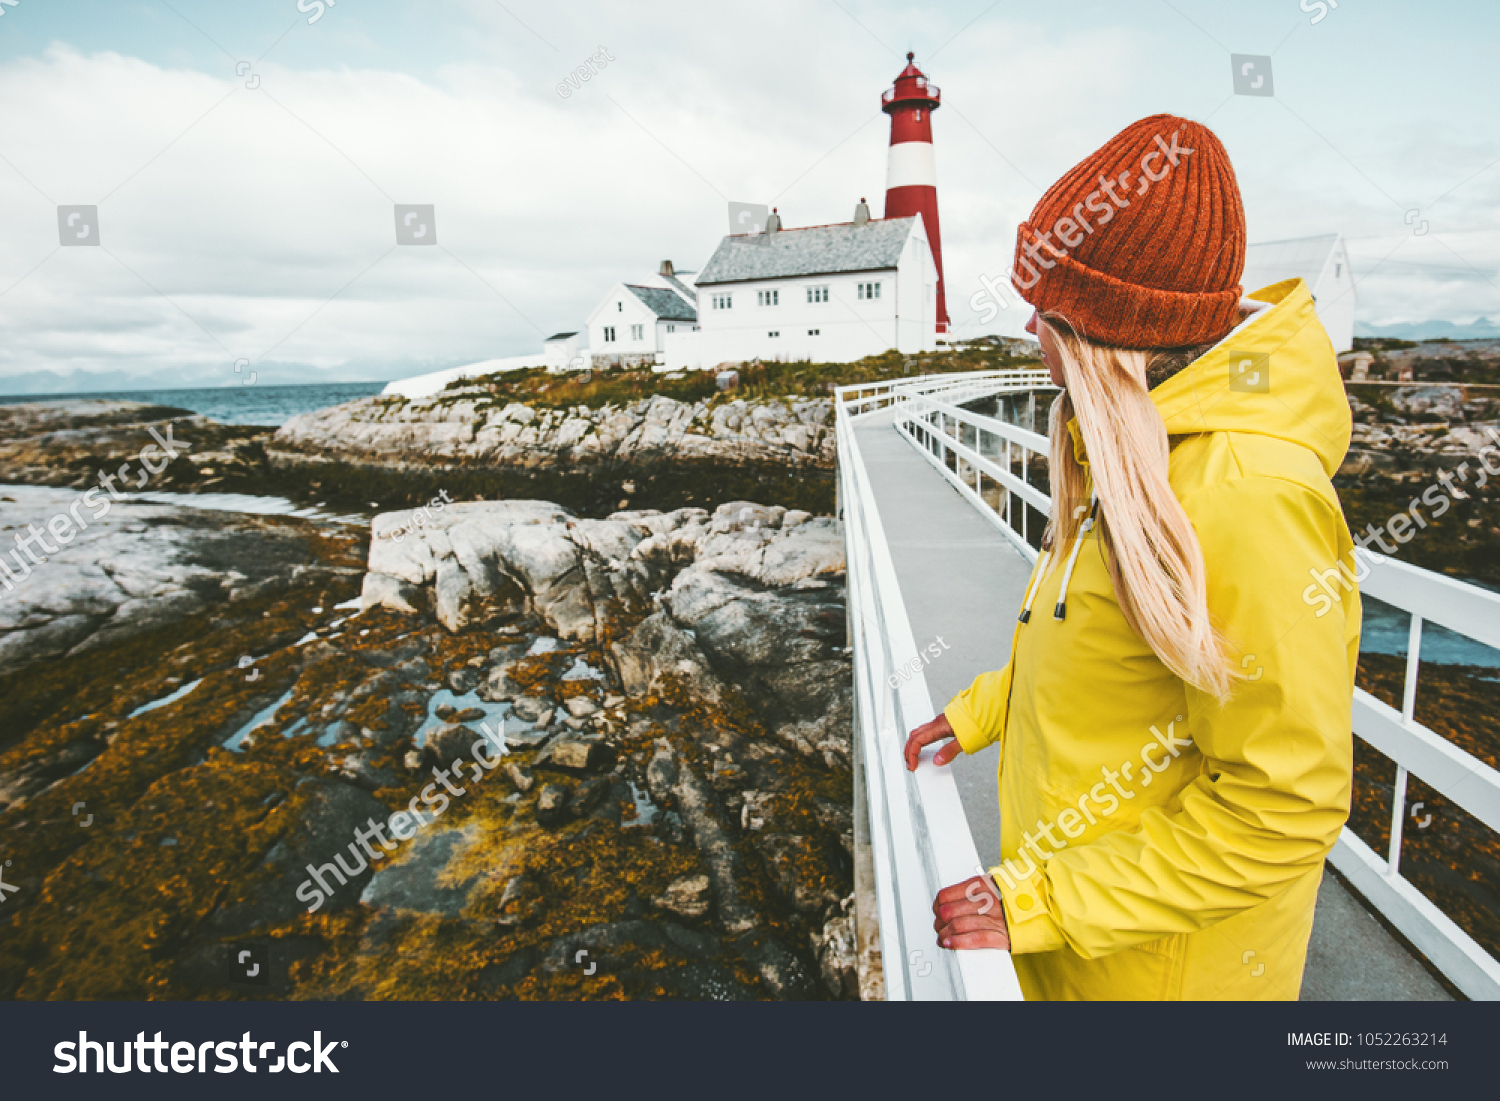 Woman sightseeing Norway lighthouse landscape Travel Lifestyle concept adventure tourist at vacations outdoor girl wearing yellow raincoat standing alone #1052263214